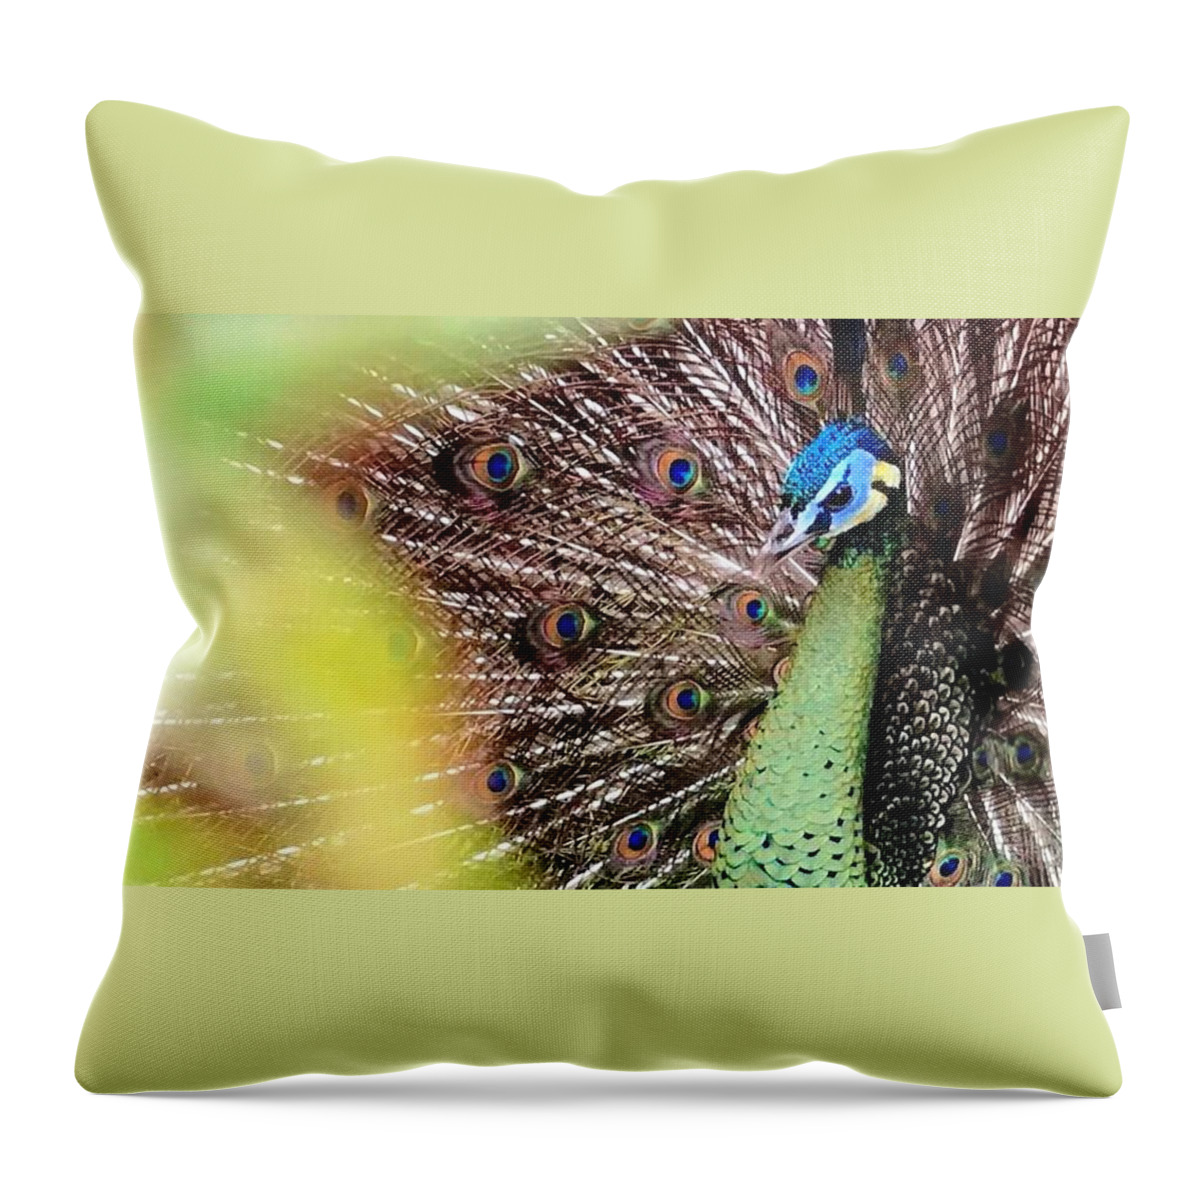 Blue Throw Pillow featuring the photograph The Eyes Have It by Frederick Lyle Morris - Disabled Veteran